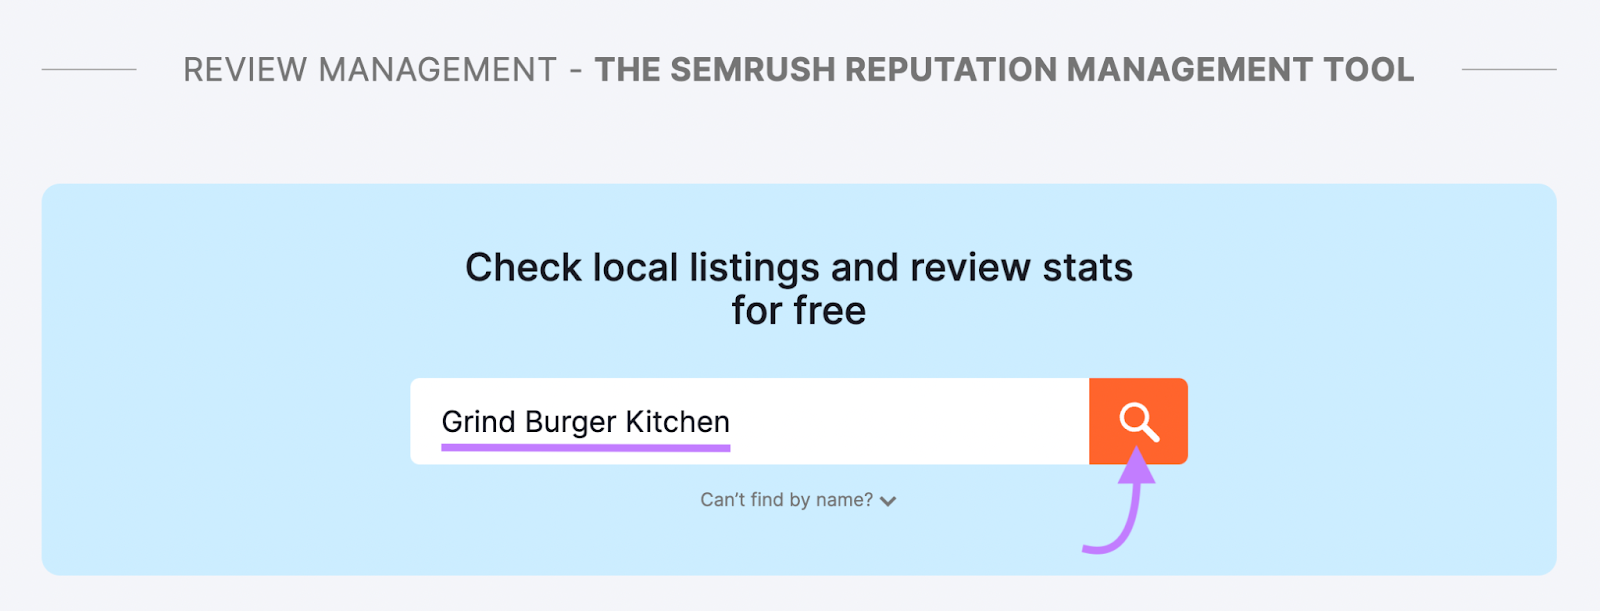 "Grind Burger Kitchen" entered into Review Management search bar